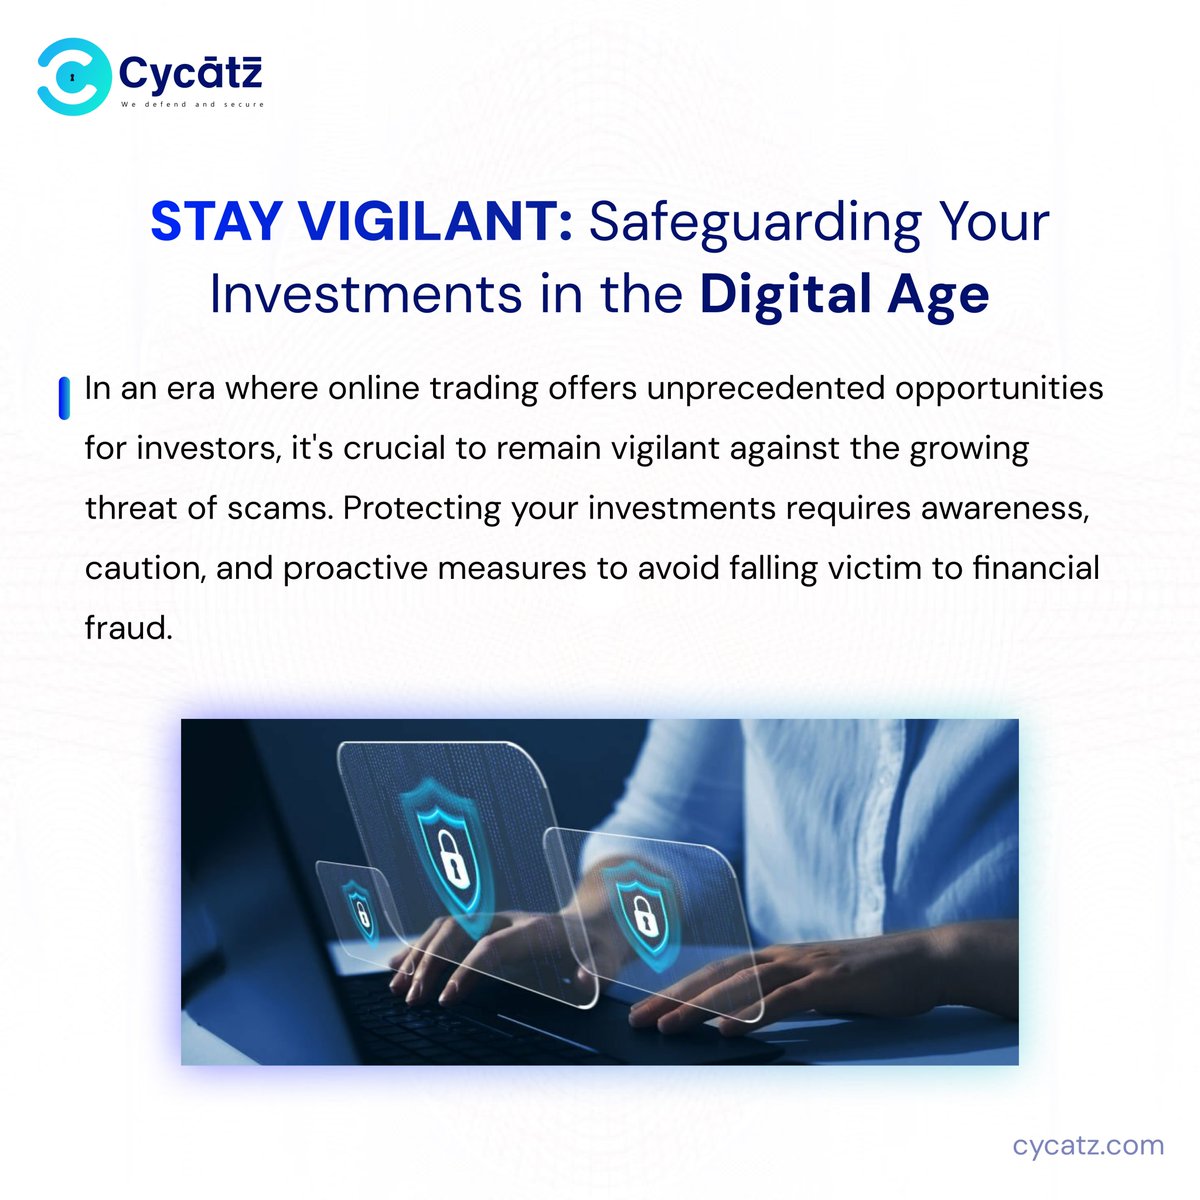 #CyCatz #Cybersecurity STAY VIGILANT: Safeguarding Your Investment in the Digital Age

#cyberawareness #cyberattack #databreaches #cybercrime #darkwebmonitoring #SurfaceWebMonitoring #mobilesecurity #emailsecurity #vendorriskmanagement #BrandMonitoring #digital #safeguarding